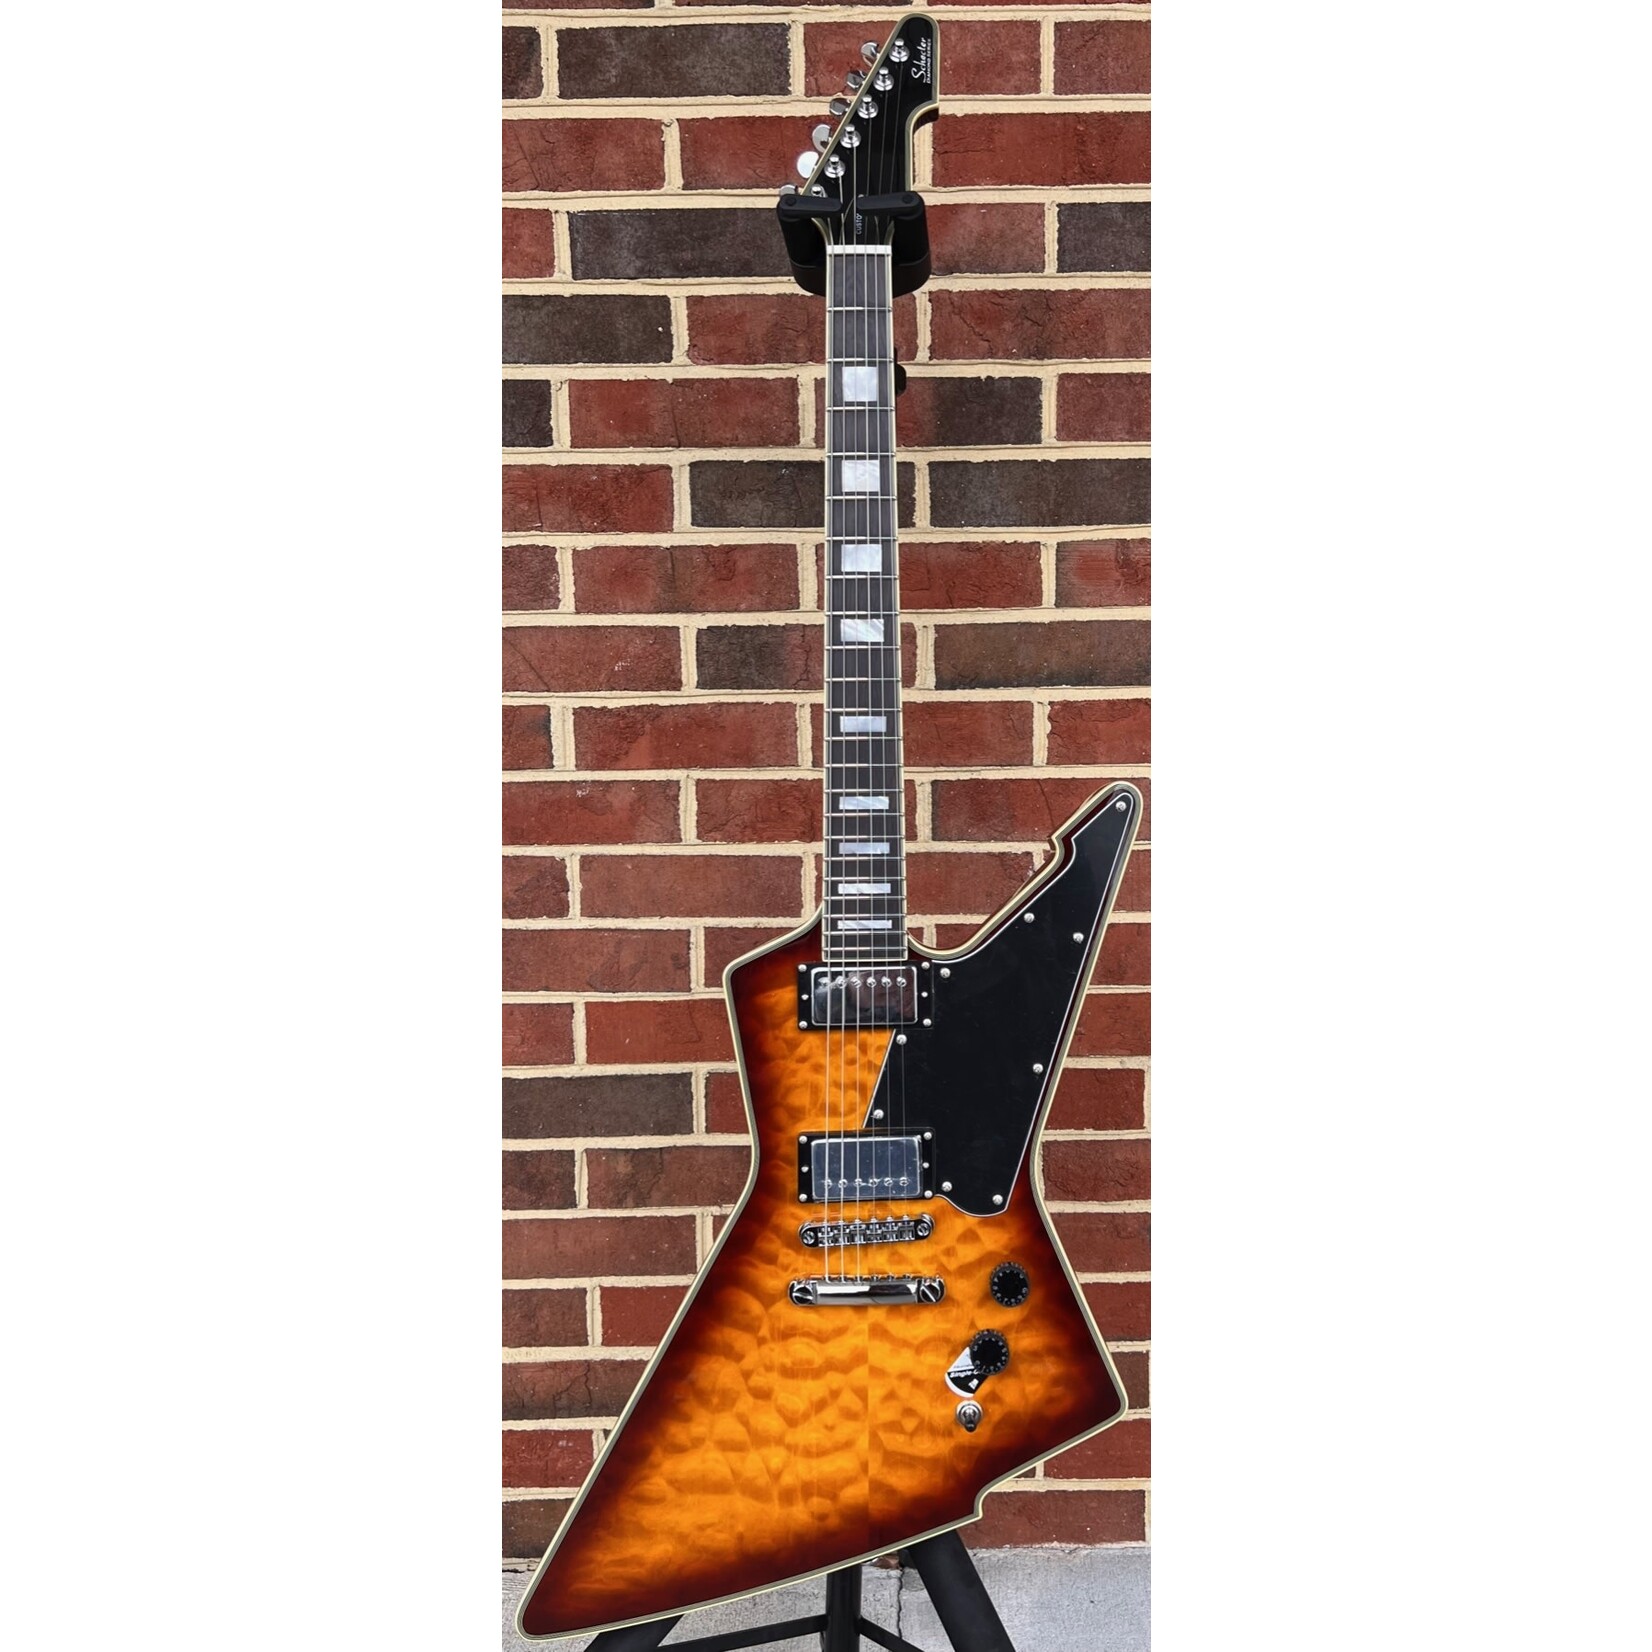 Schecter Guitar Research Schecter E-1 Custom, Vintage Sunburst, Quilted Maple Top, Ebony Fretboard, Locking Tuners, Schecter USA Sunset Strip/Pasadena Pickups, SN# W23111845